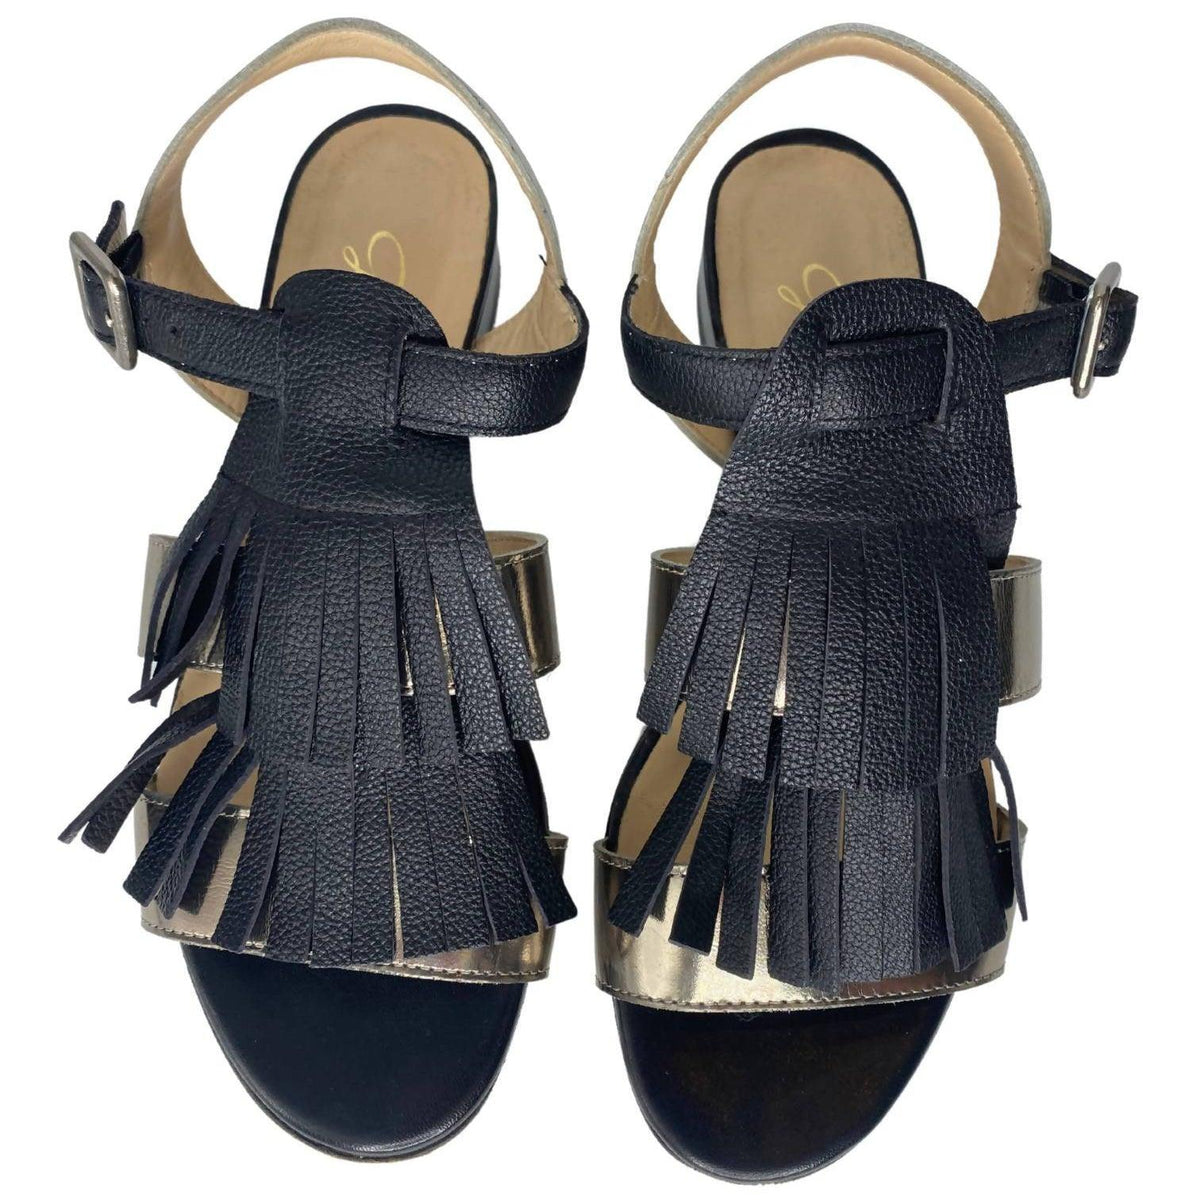 Pre-owned GRILLI Black & Metallic Gold Leather Tassel Sandals | Size US 8 - EU 38 - theREMODA